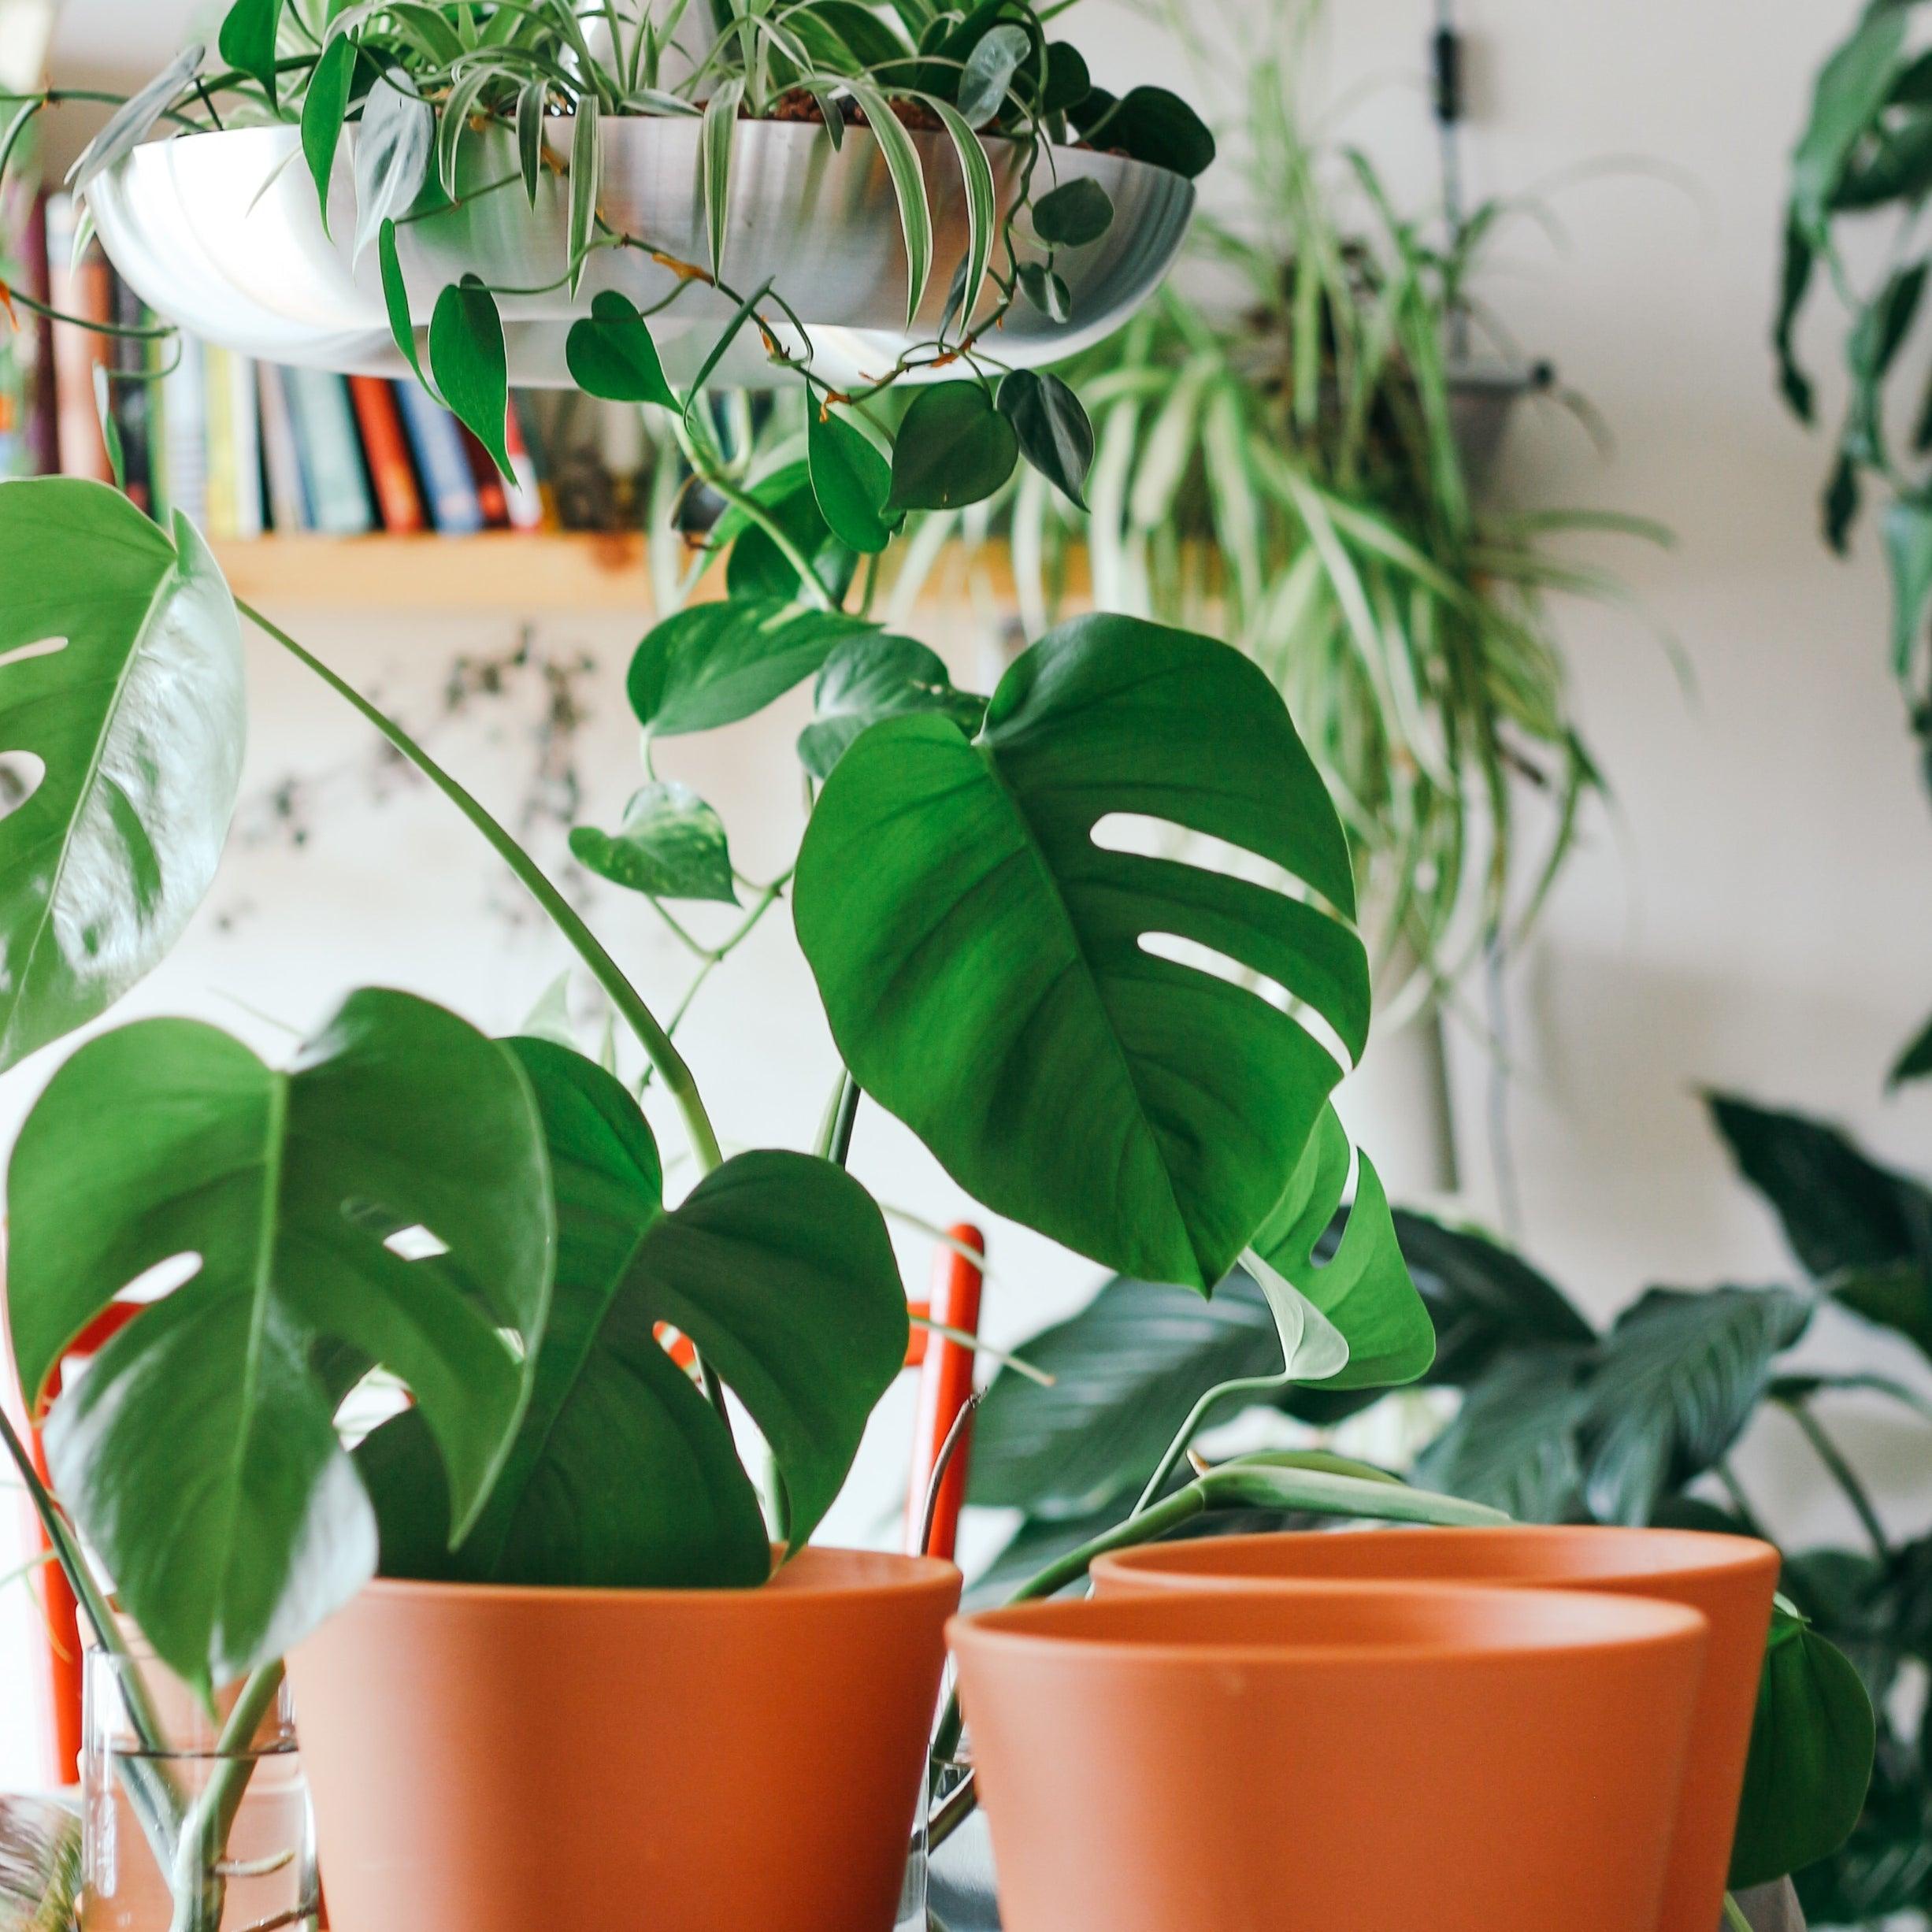 Caring for indoor plants - for peat's sake